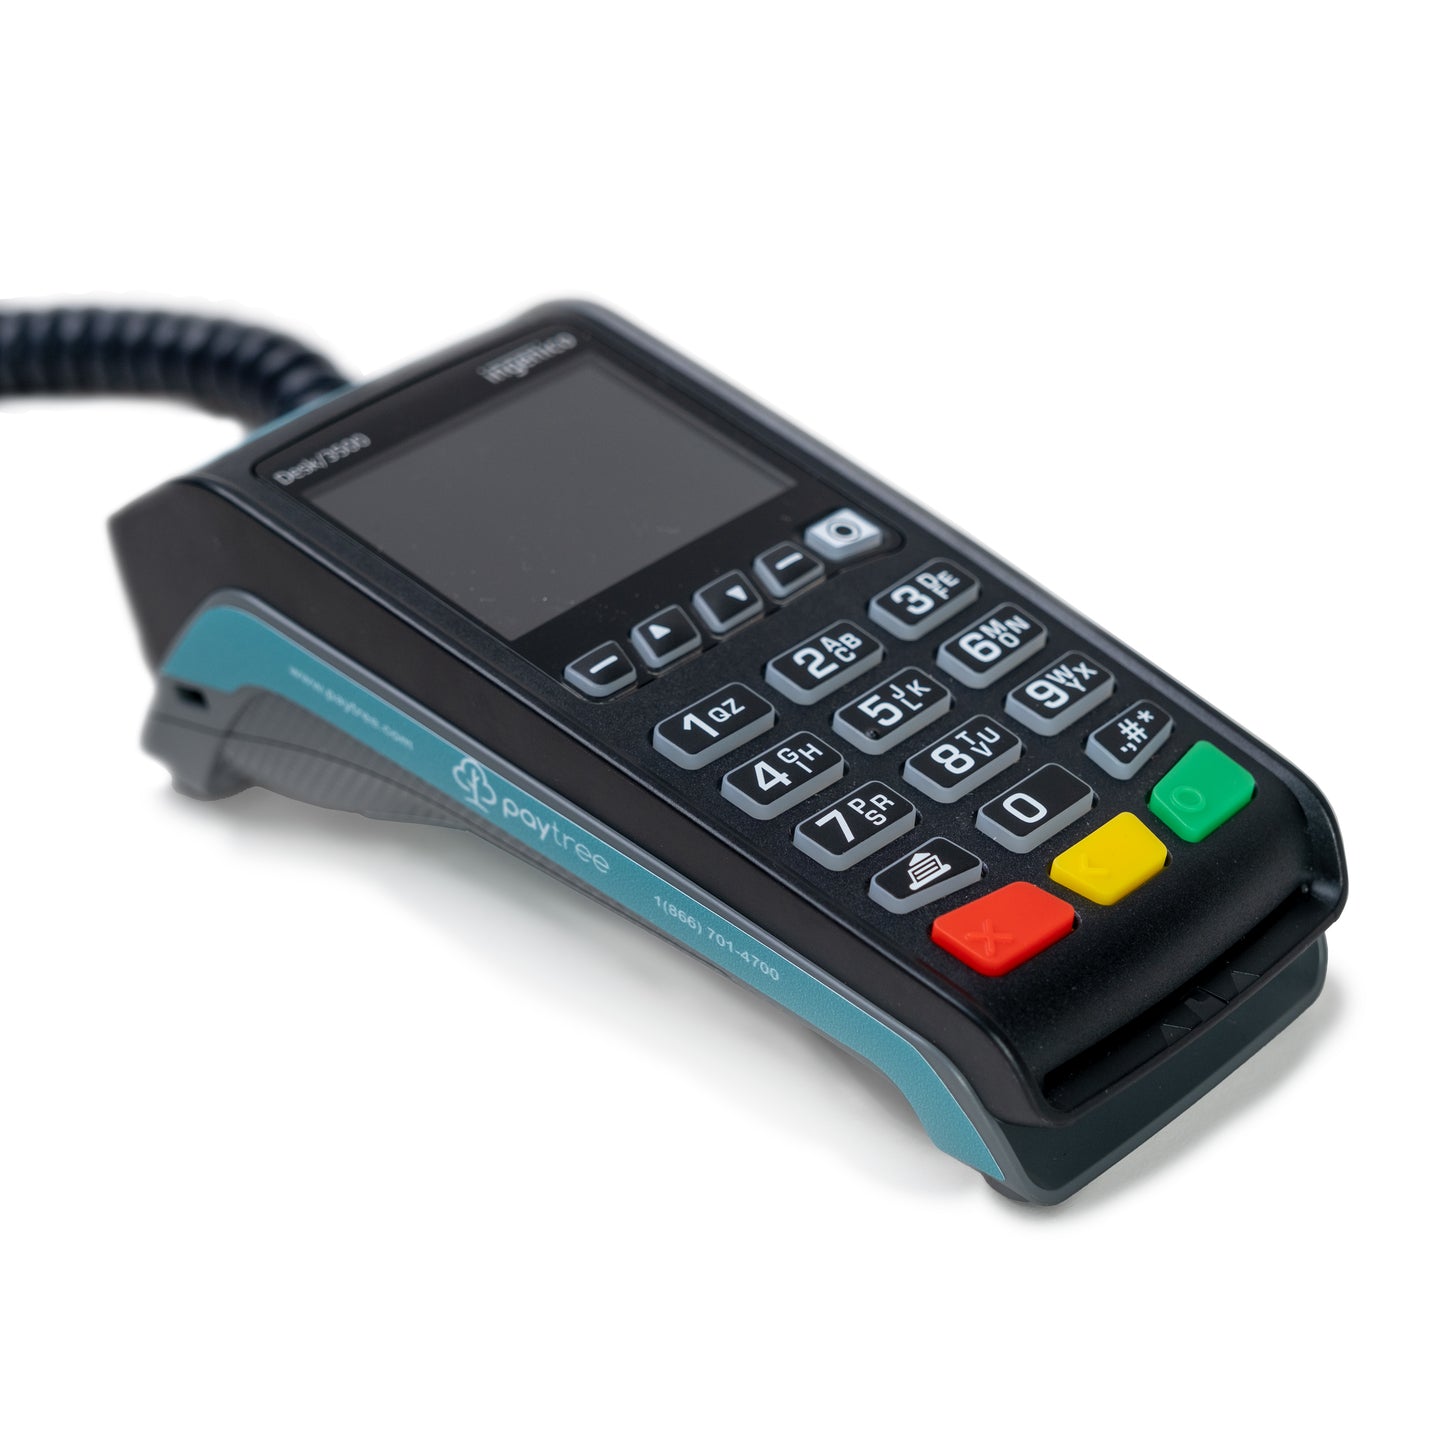 Close-up view of the Ingenico Desk 3500 payment terminal's keypad and screen